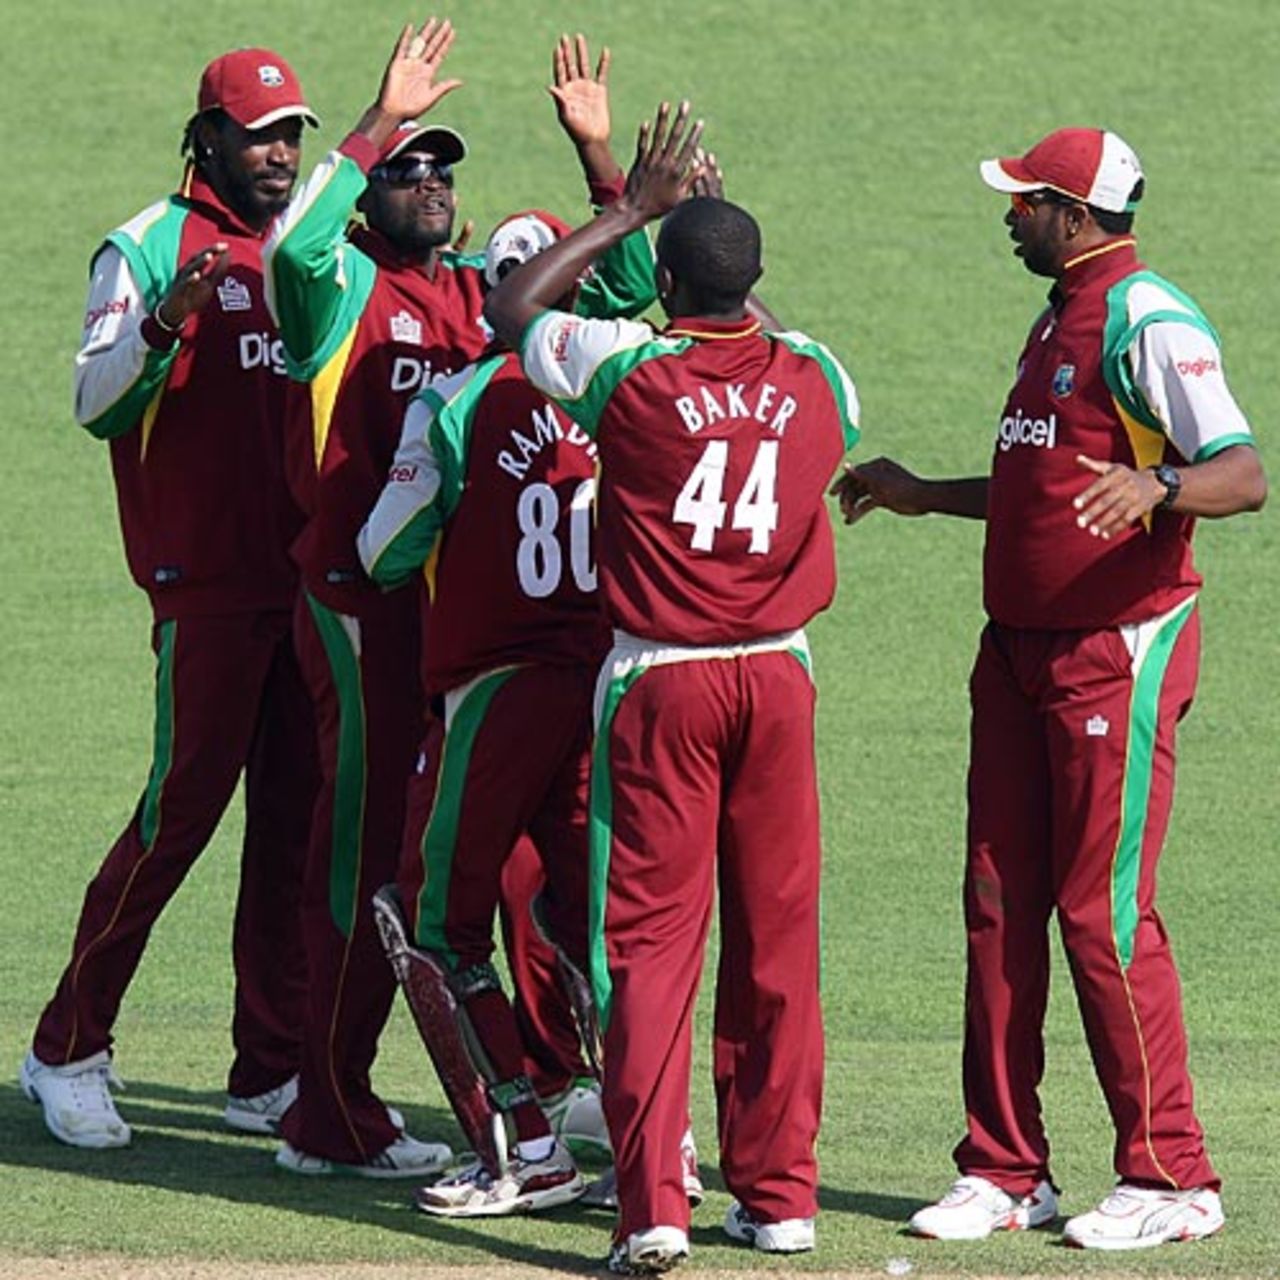 Lionel Baker is congratulated by team-mates after dismissing Brendon McCullum, New Zealand v West Indies, 5th ODI, Napier, January 13, 2009